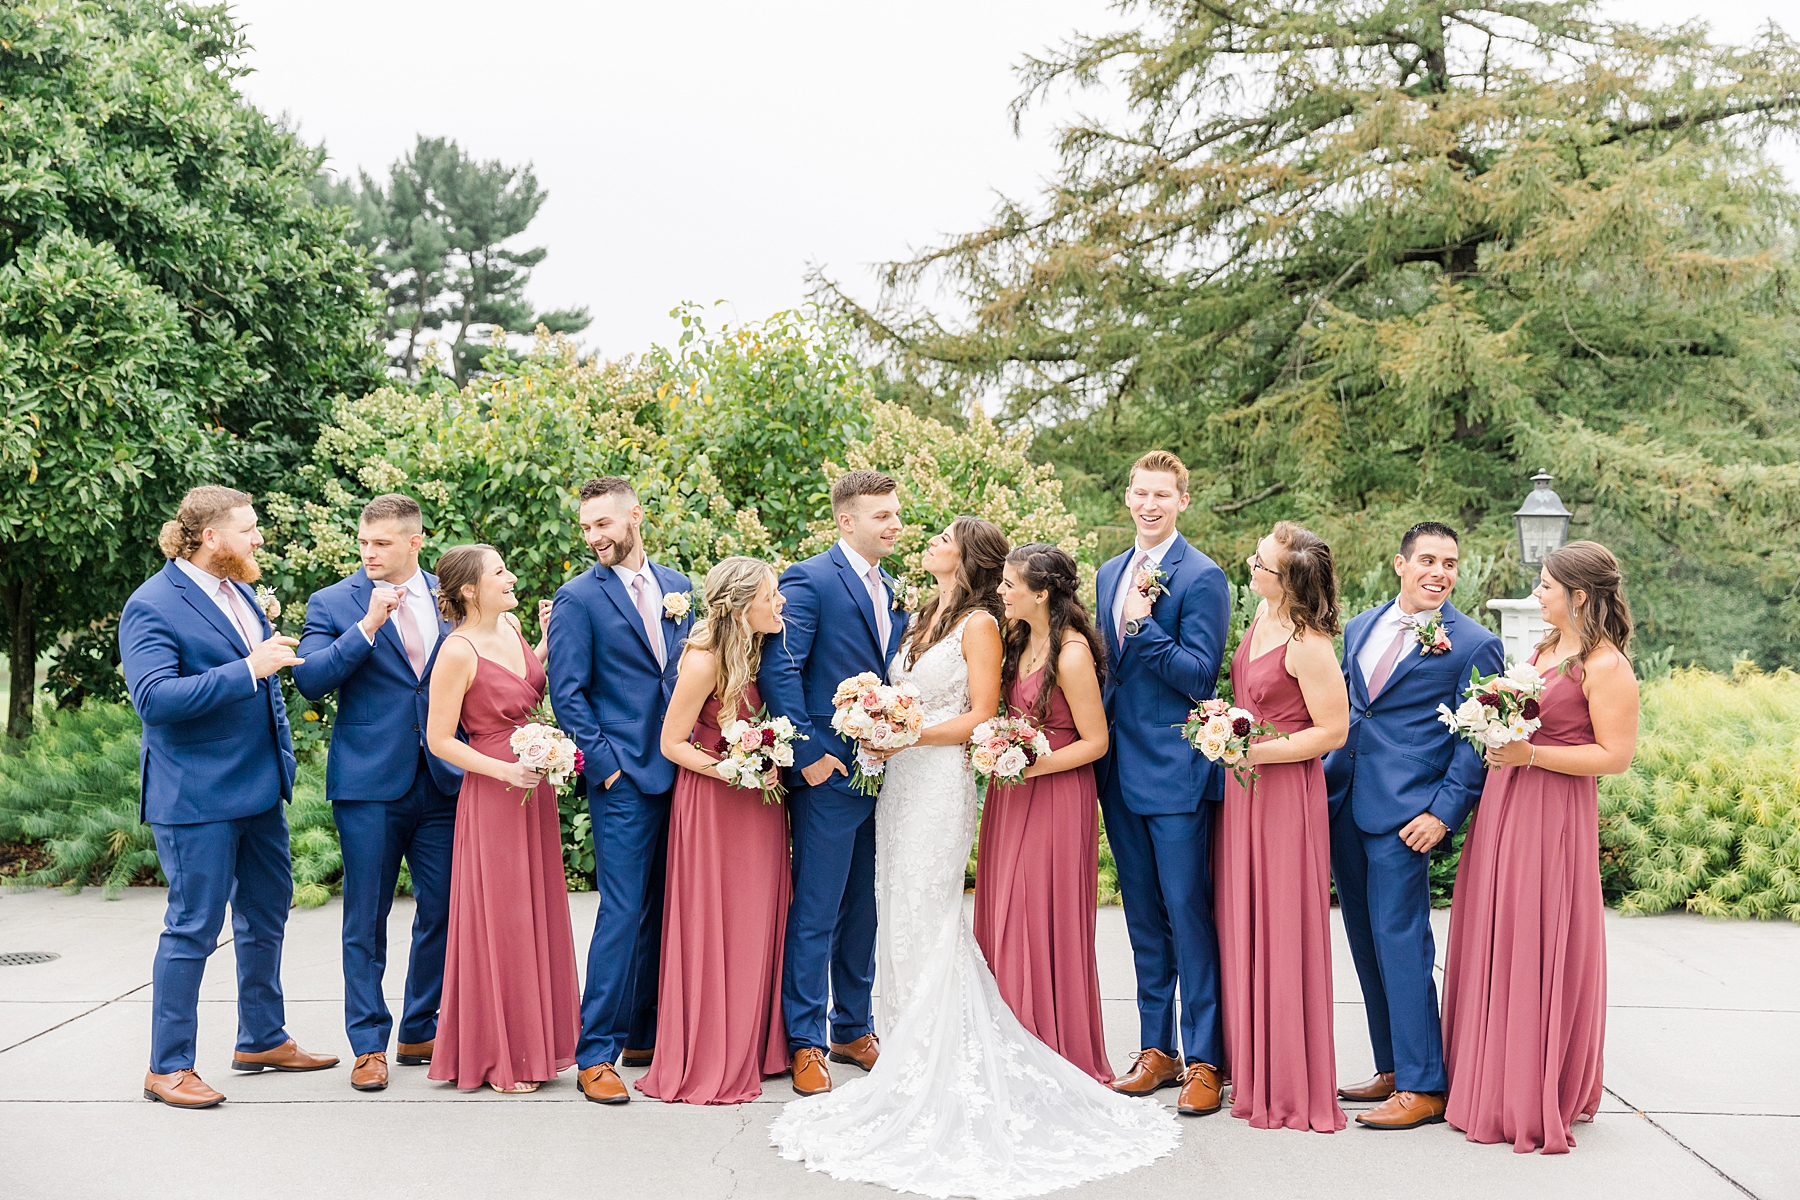 bridesmaids in rosewood dresses and groomsmen in navy suits